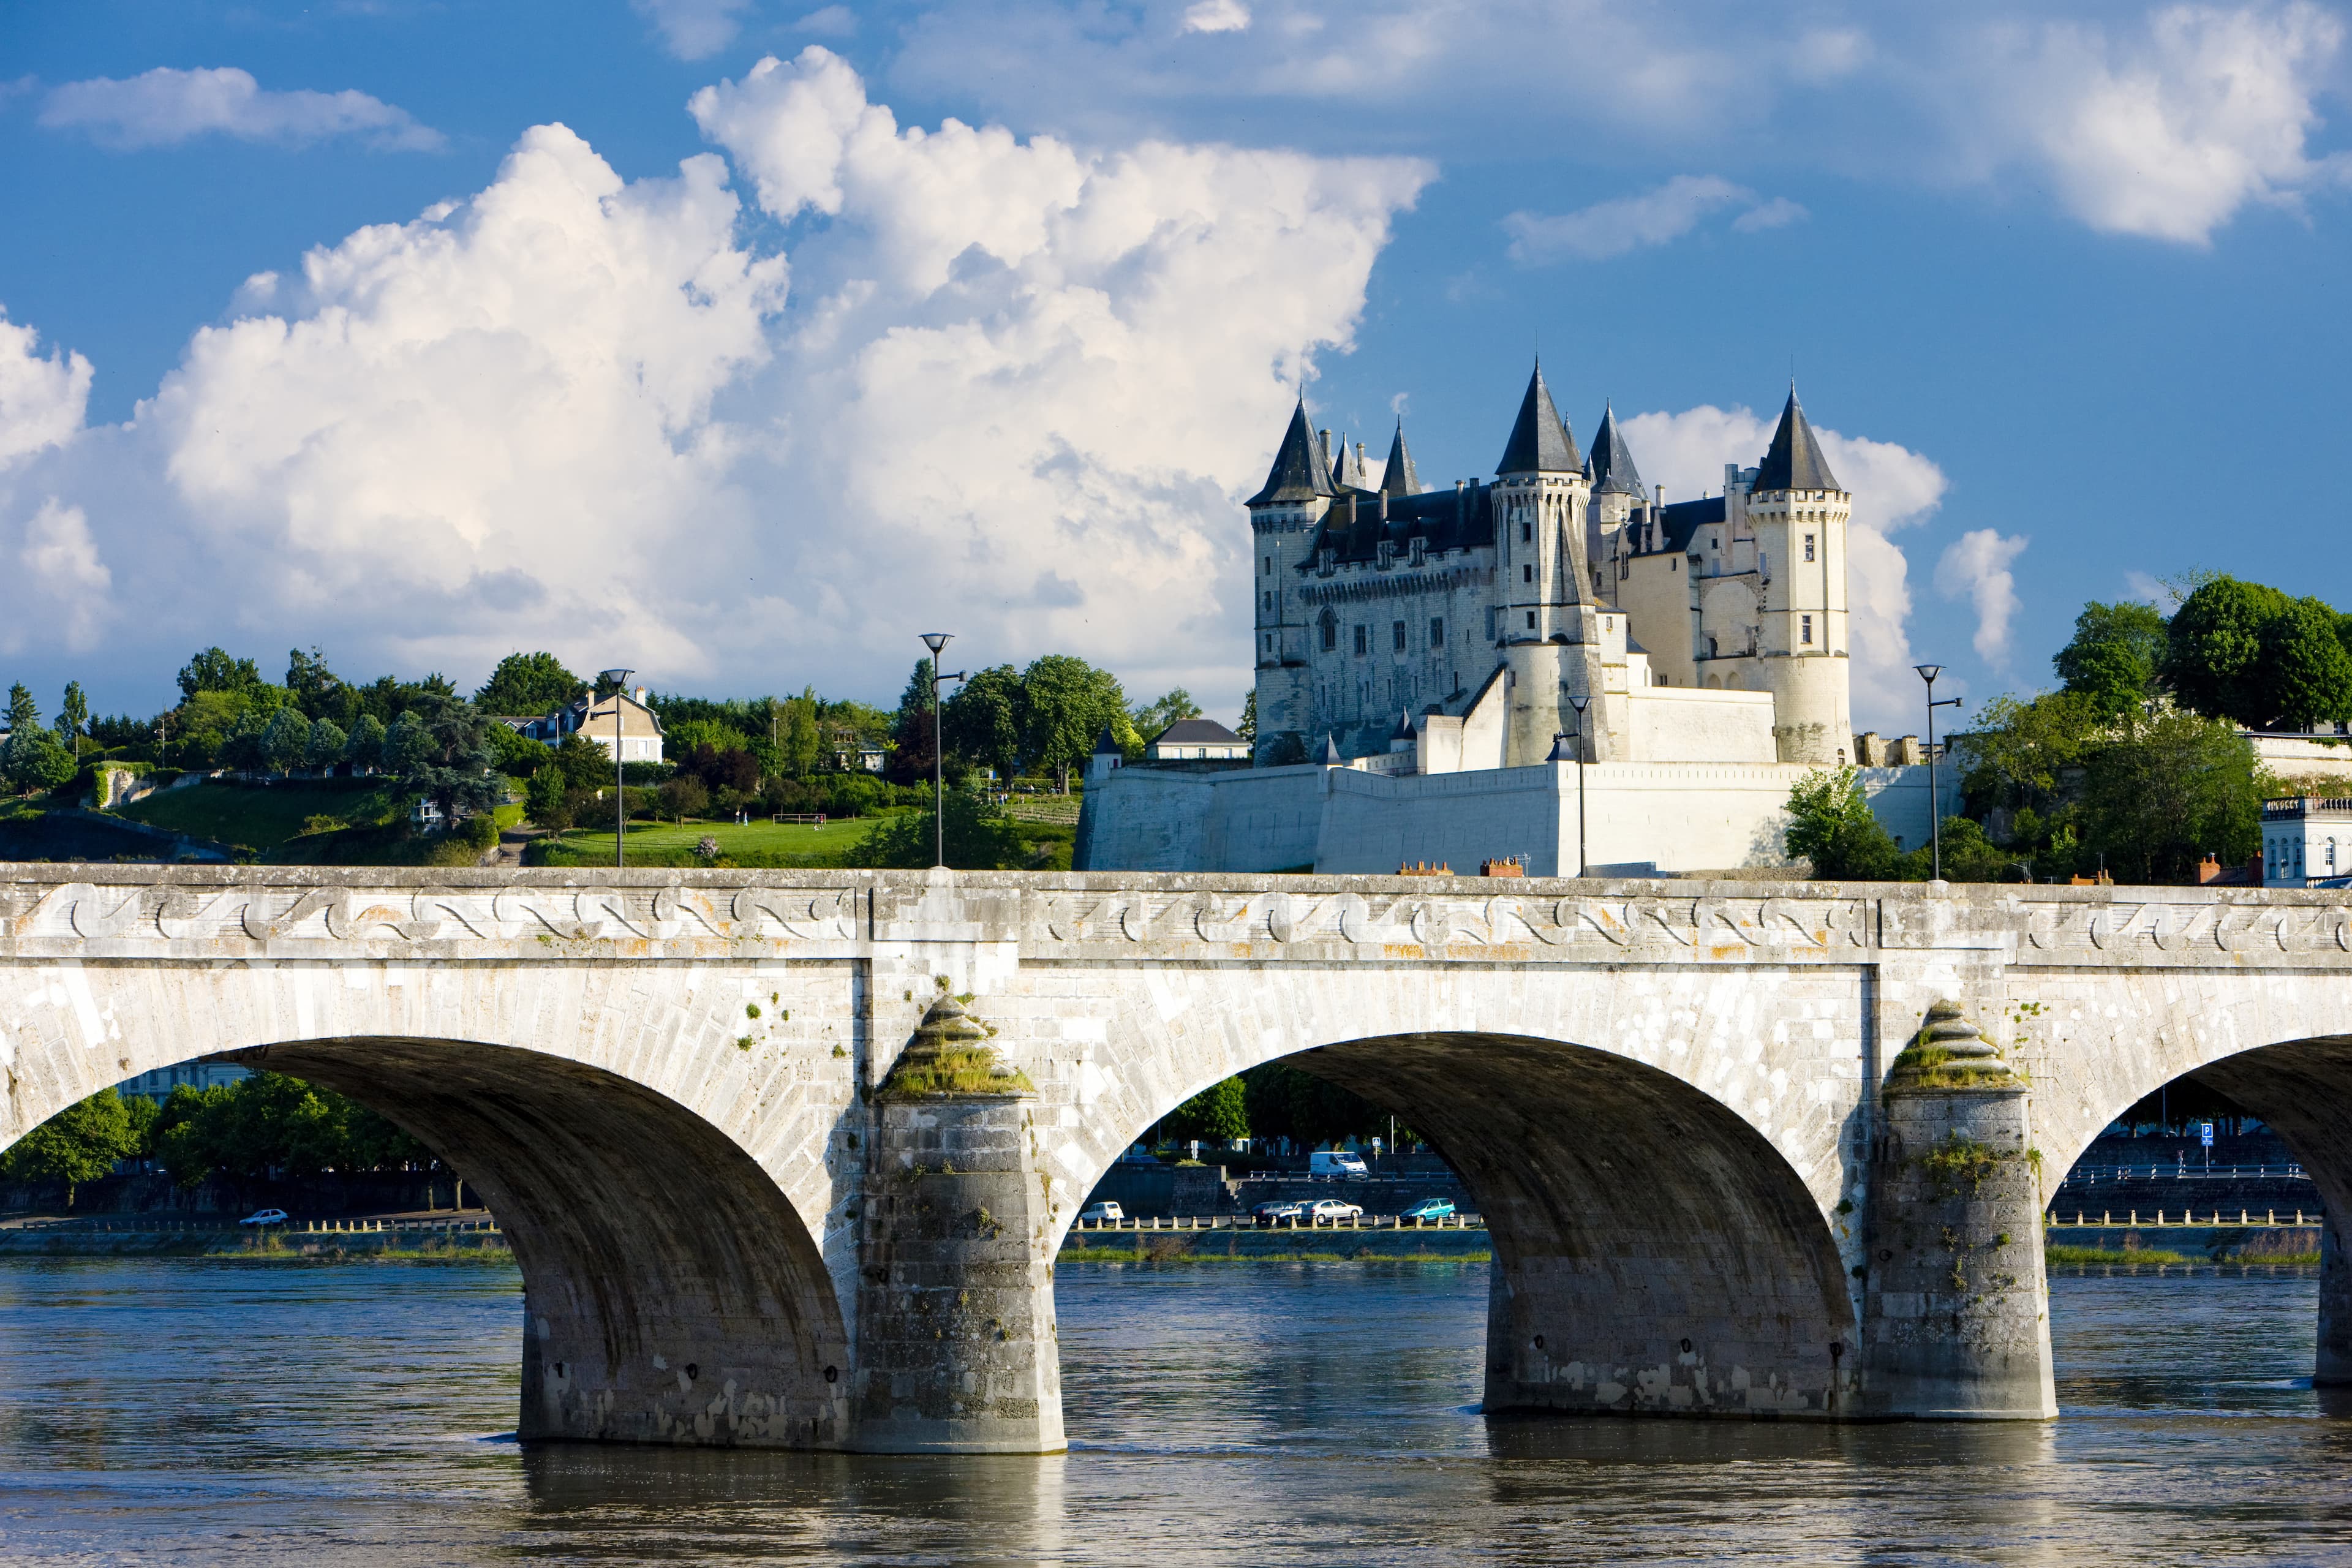 The beautiful town of Saumur in France